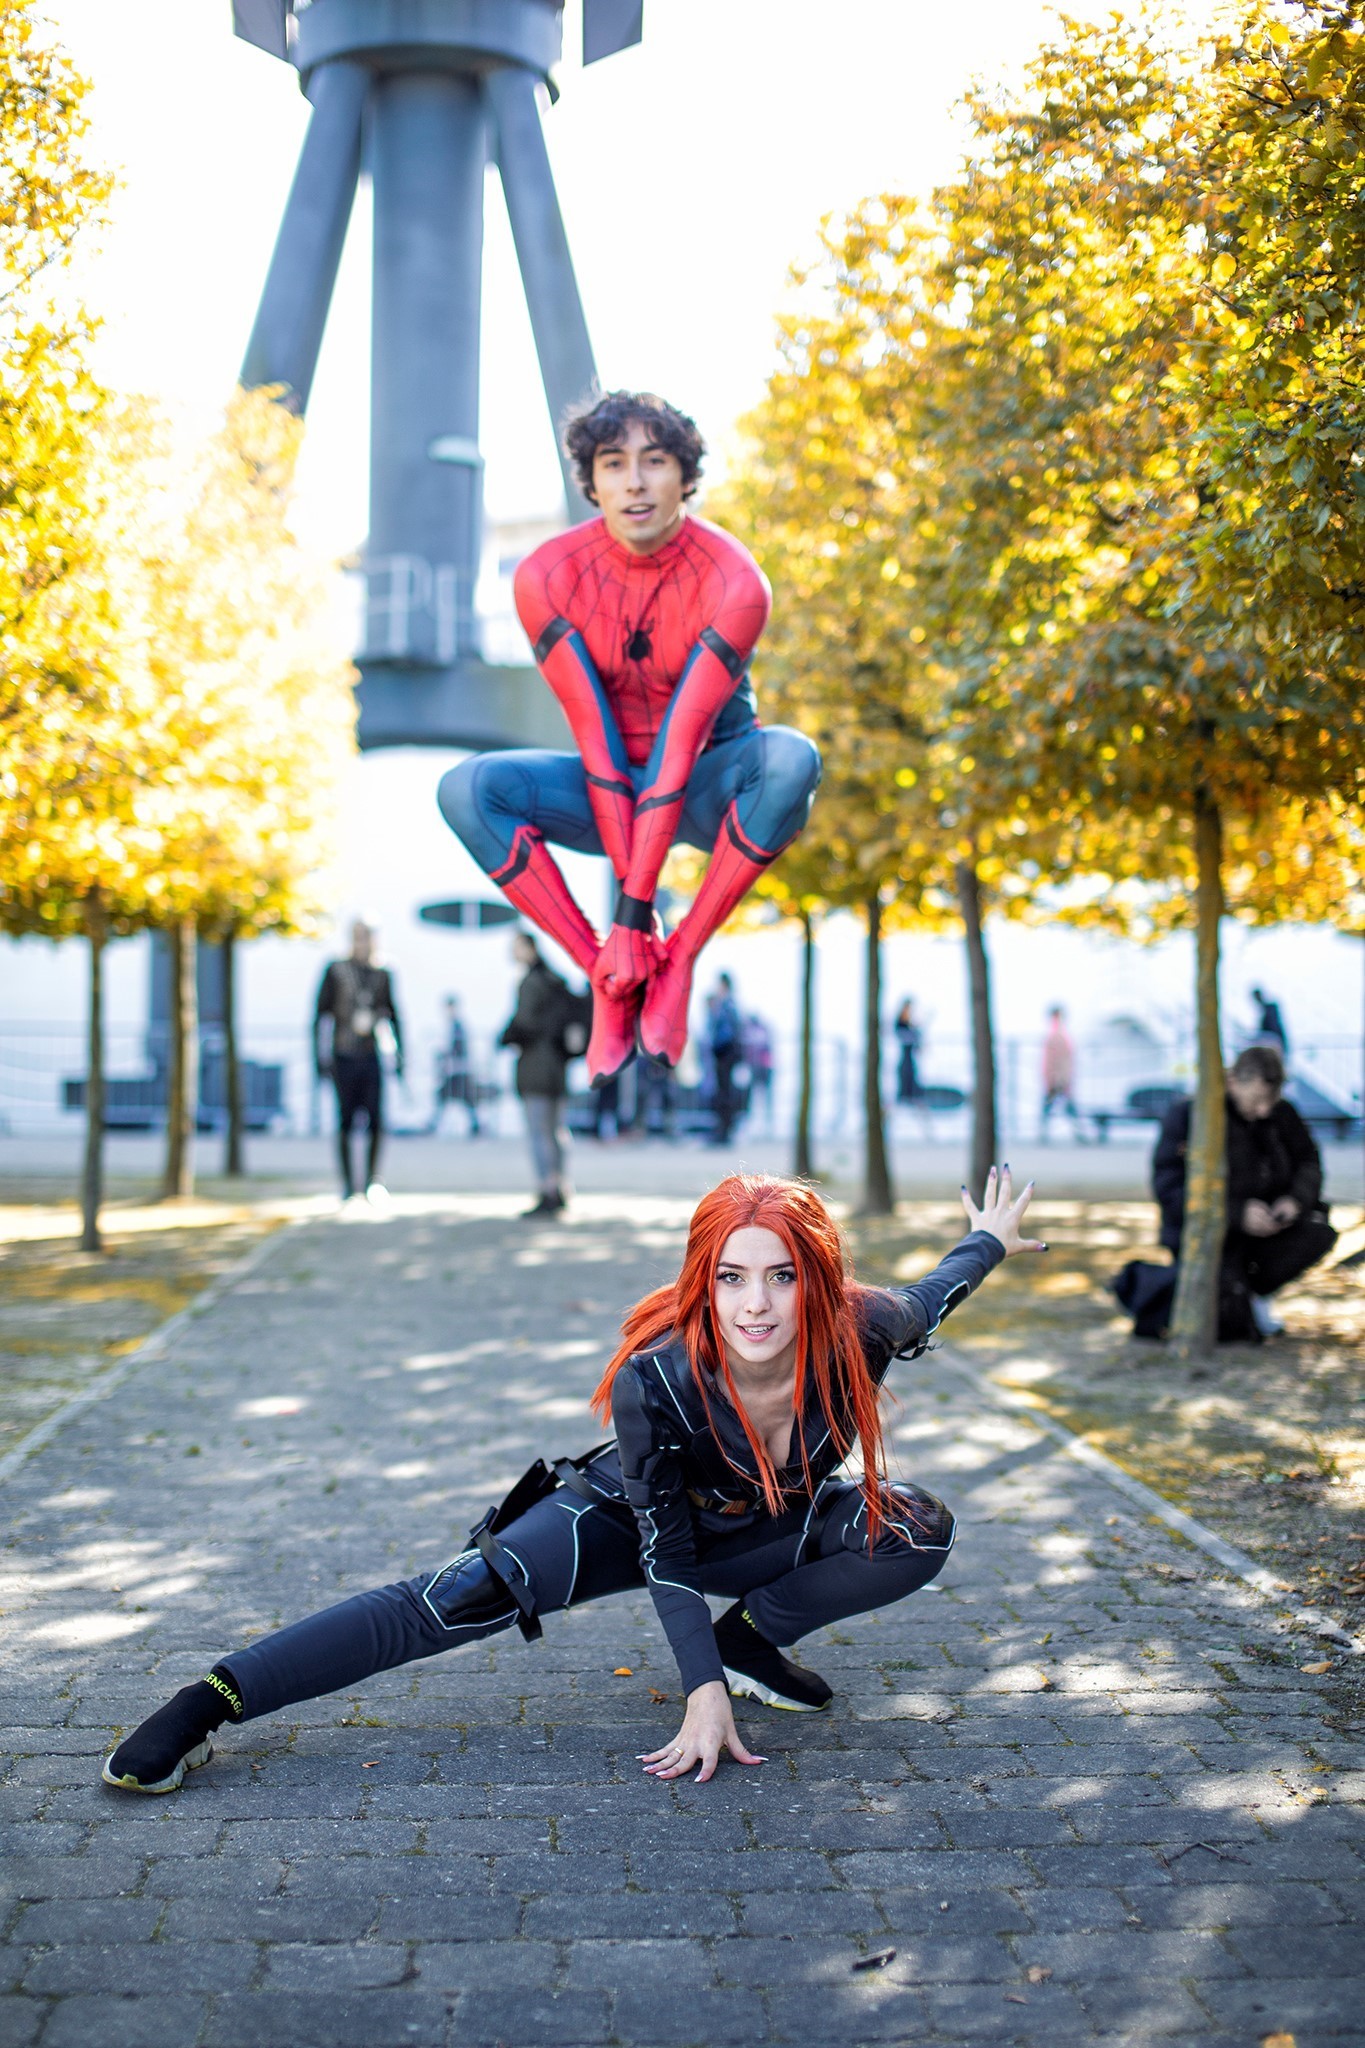 Spider Man and Black Widow cosplay photography